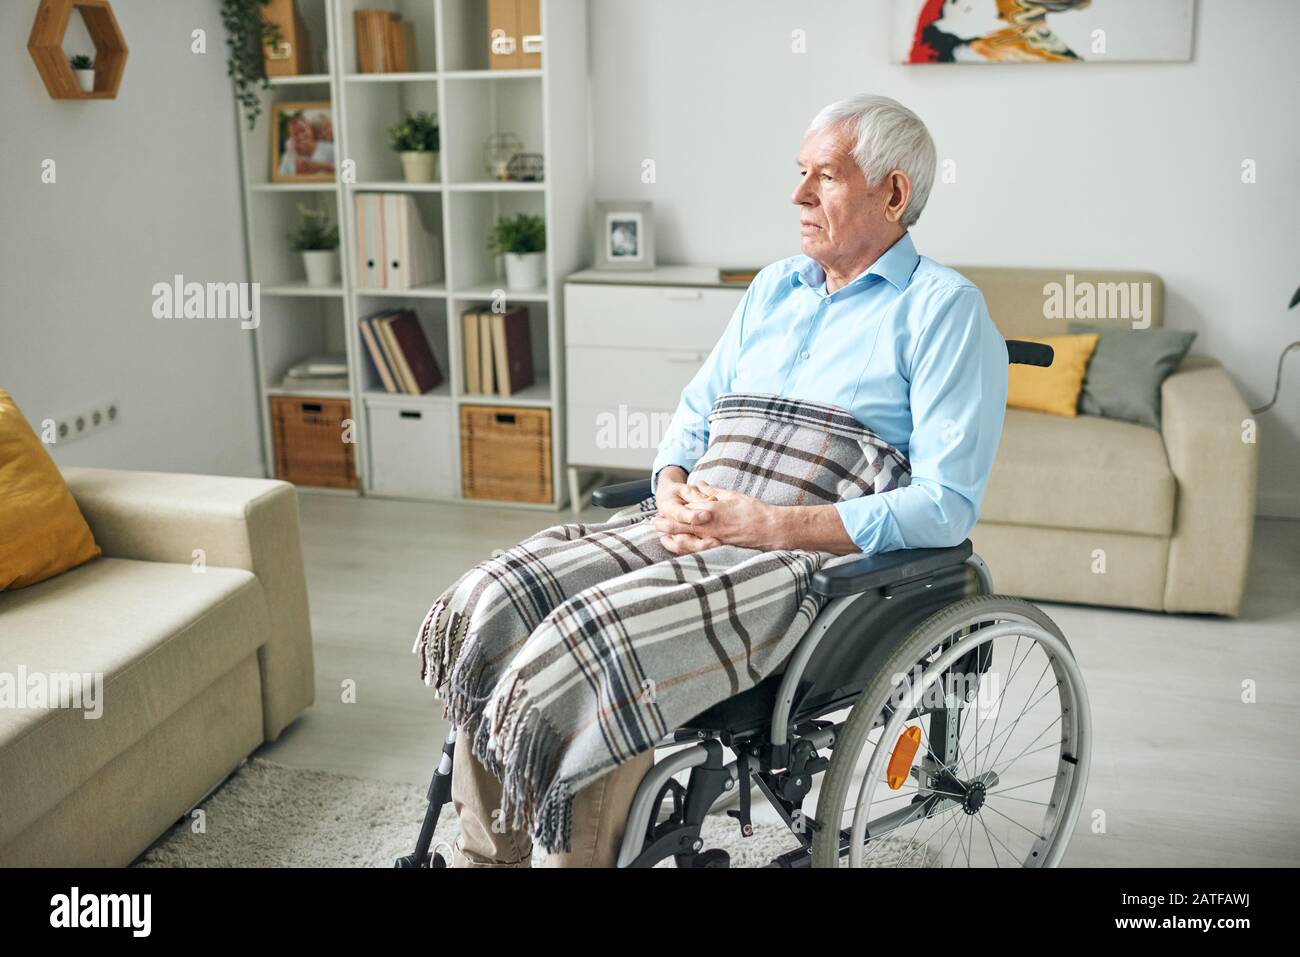 Sad and serene senior disable man sitting in wheelchair by couch at home Stock Photo